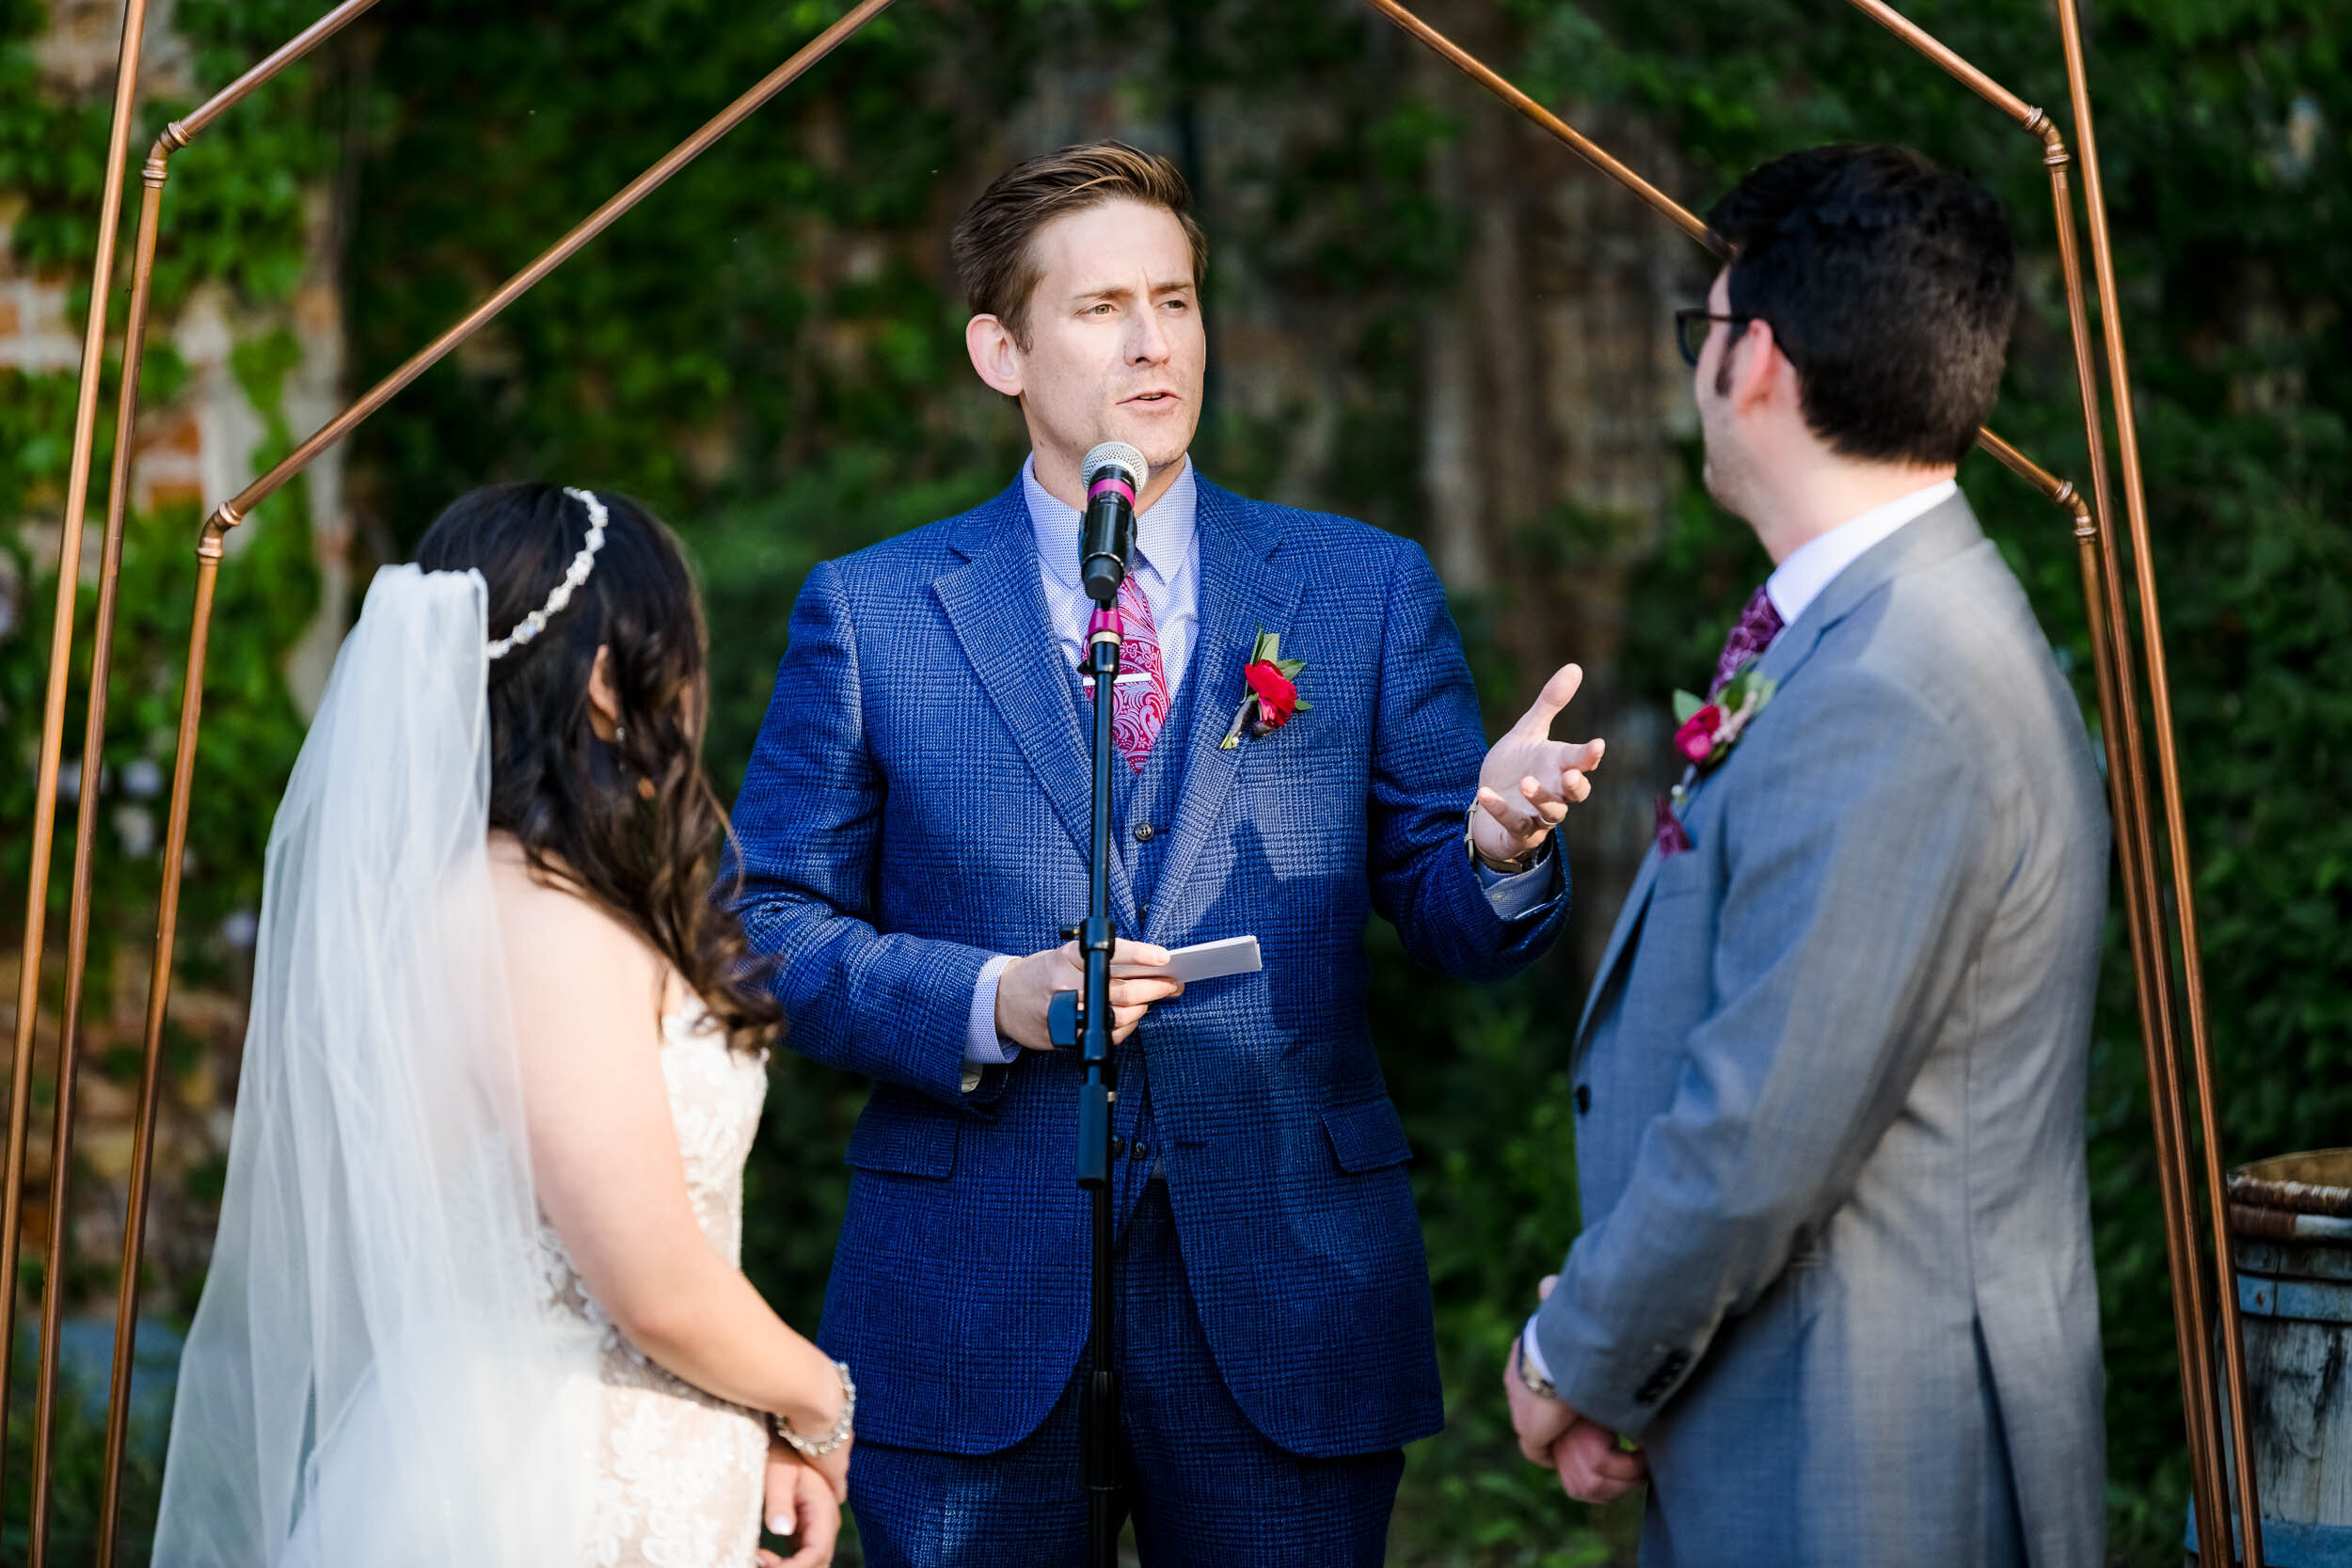 Chicago Wedding Photographer | City Winery | J. Brown Photography | officiant performs the wedding ceremony.